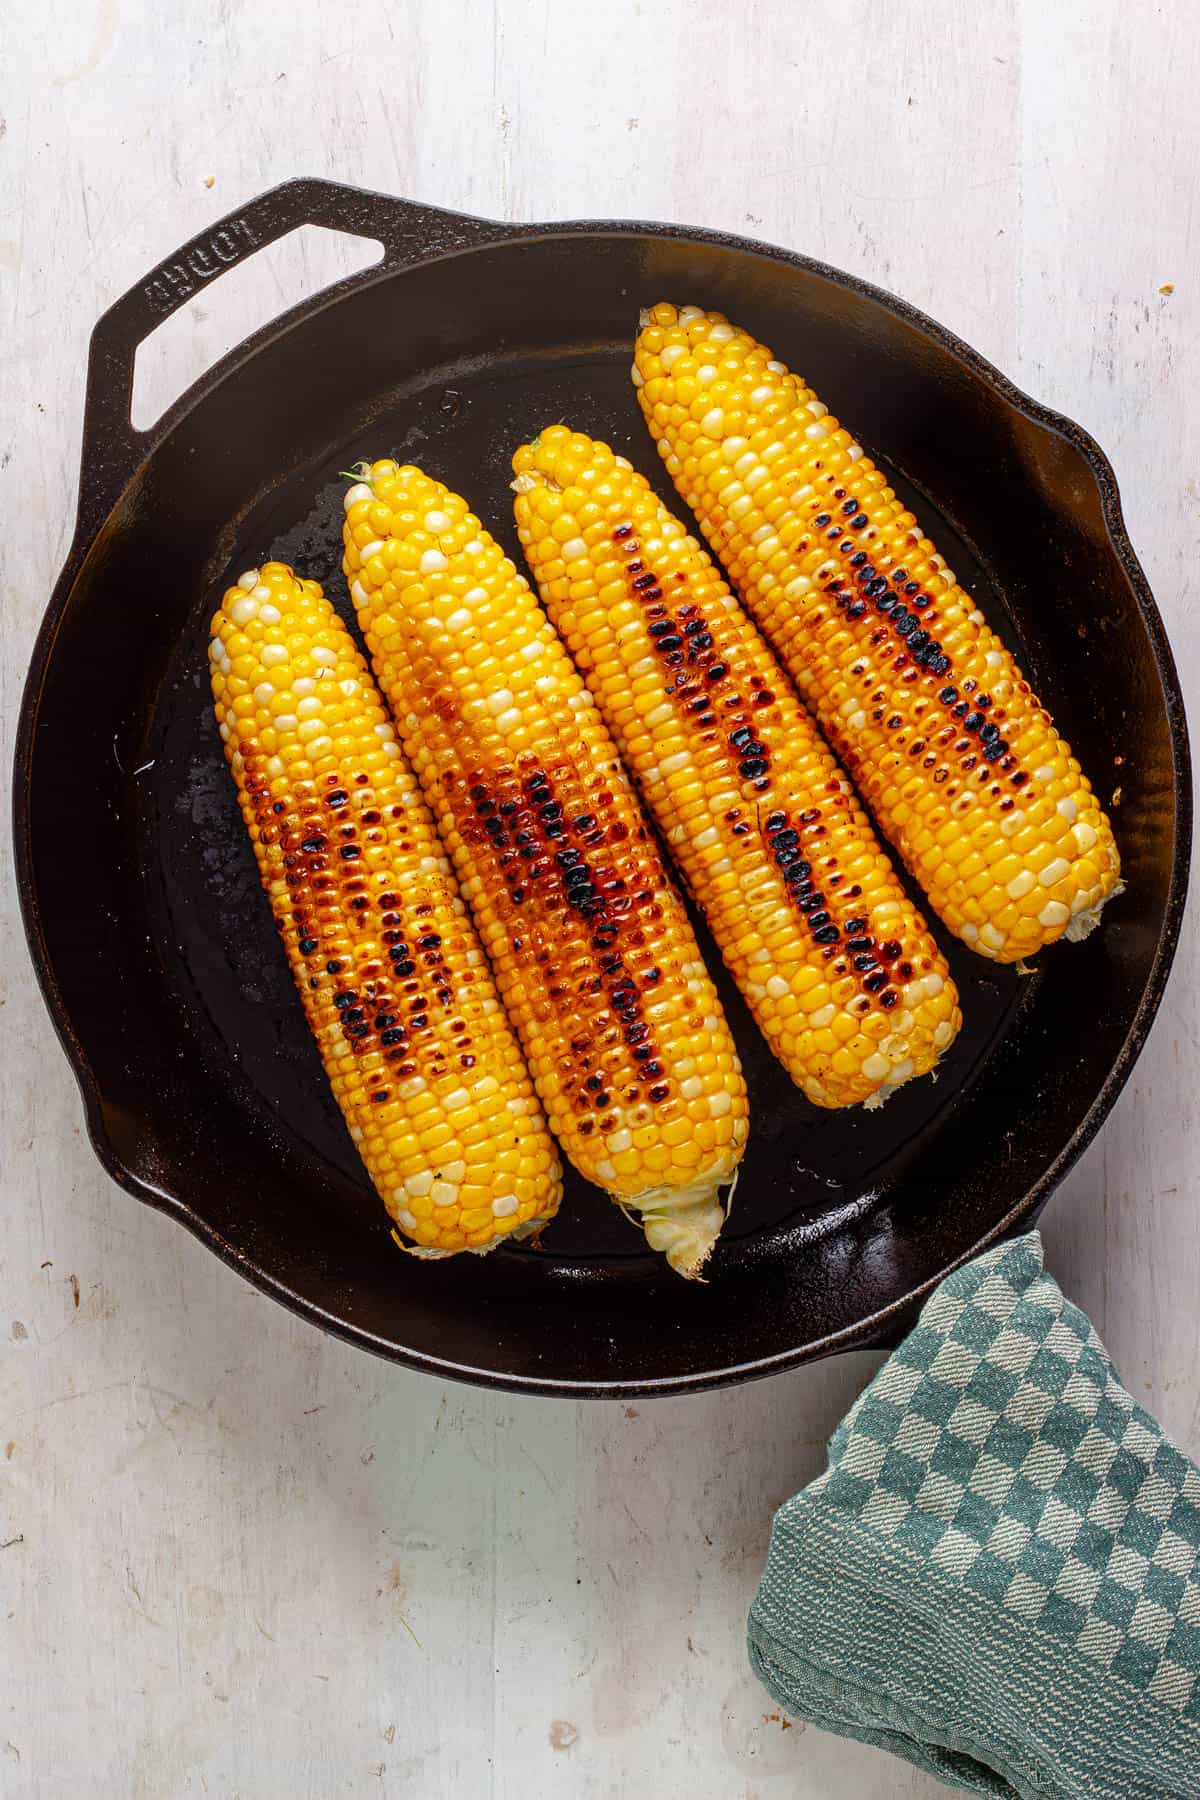 Charred corn on the cob in a skillet.